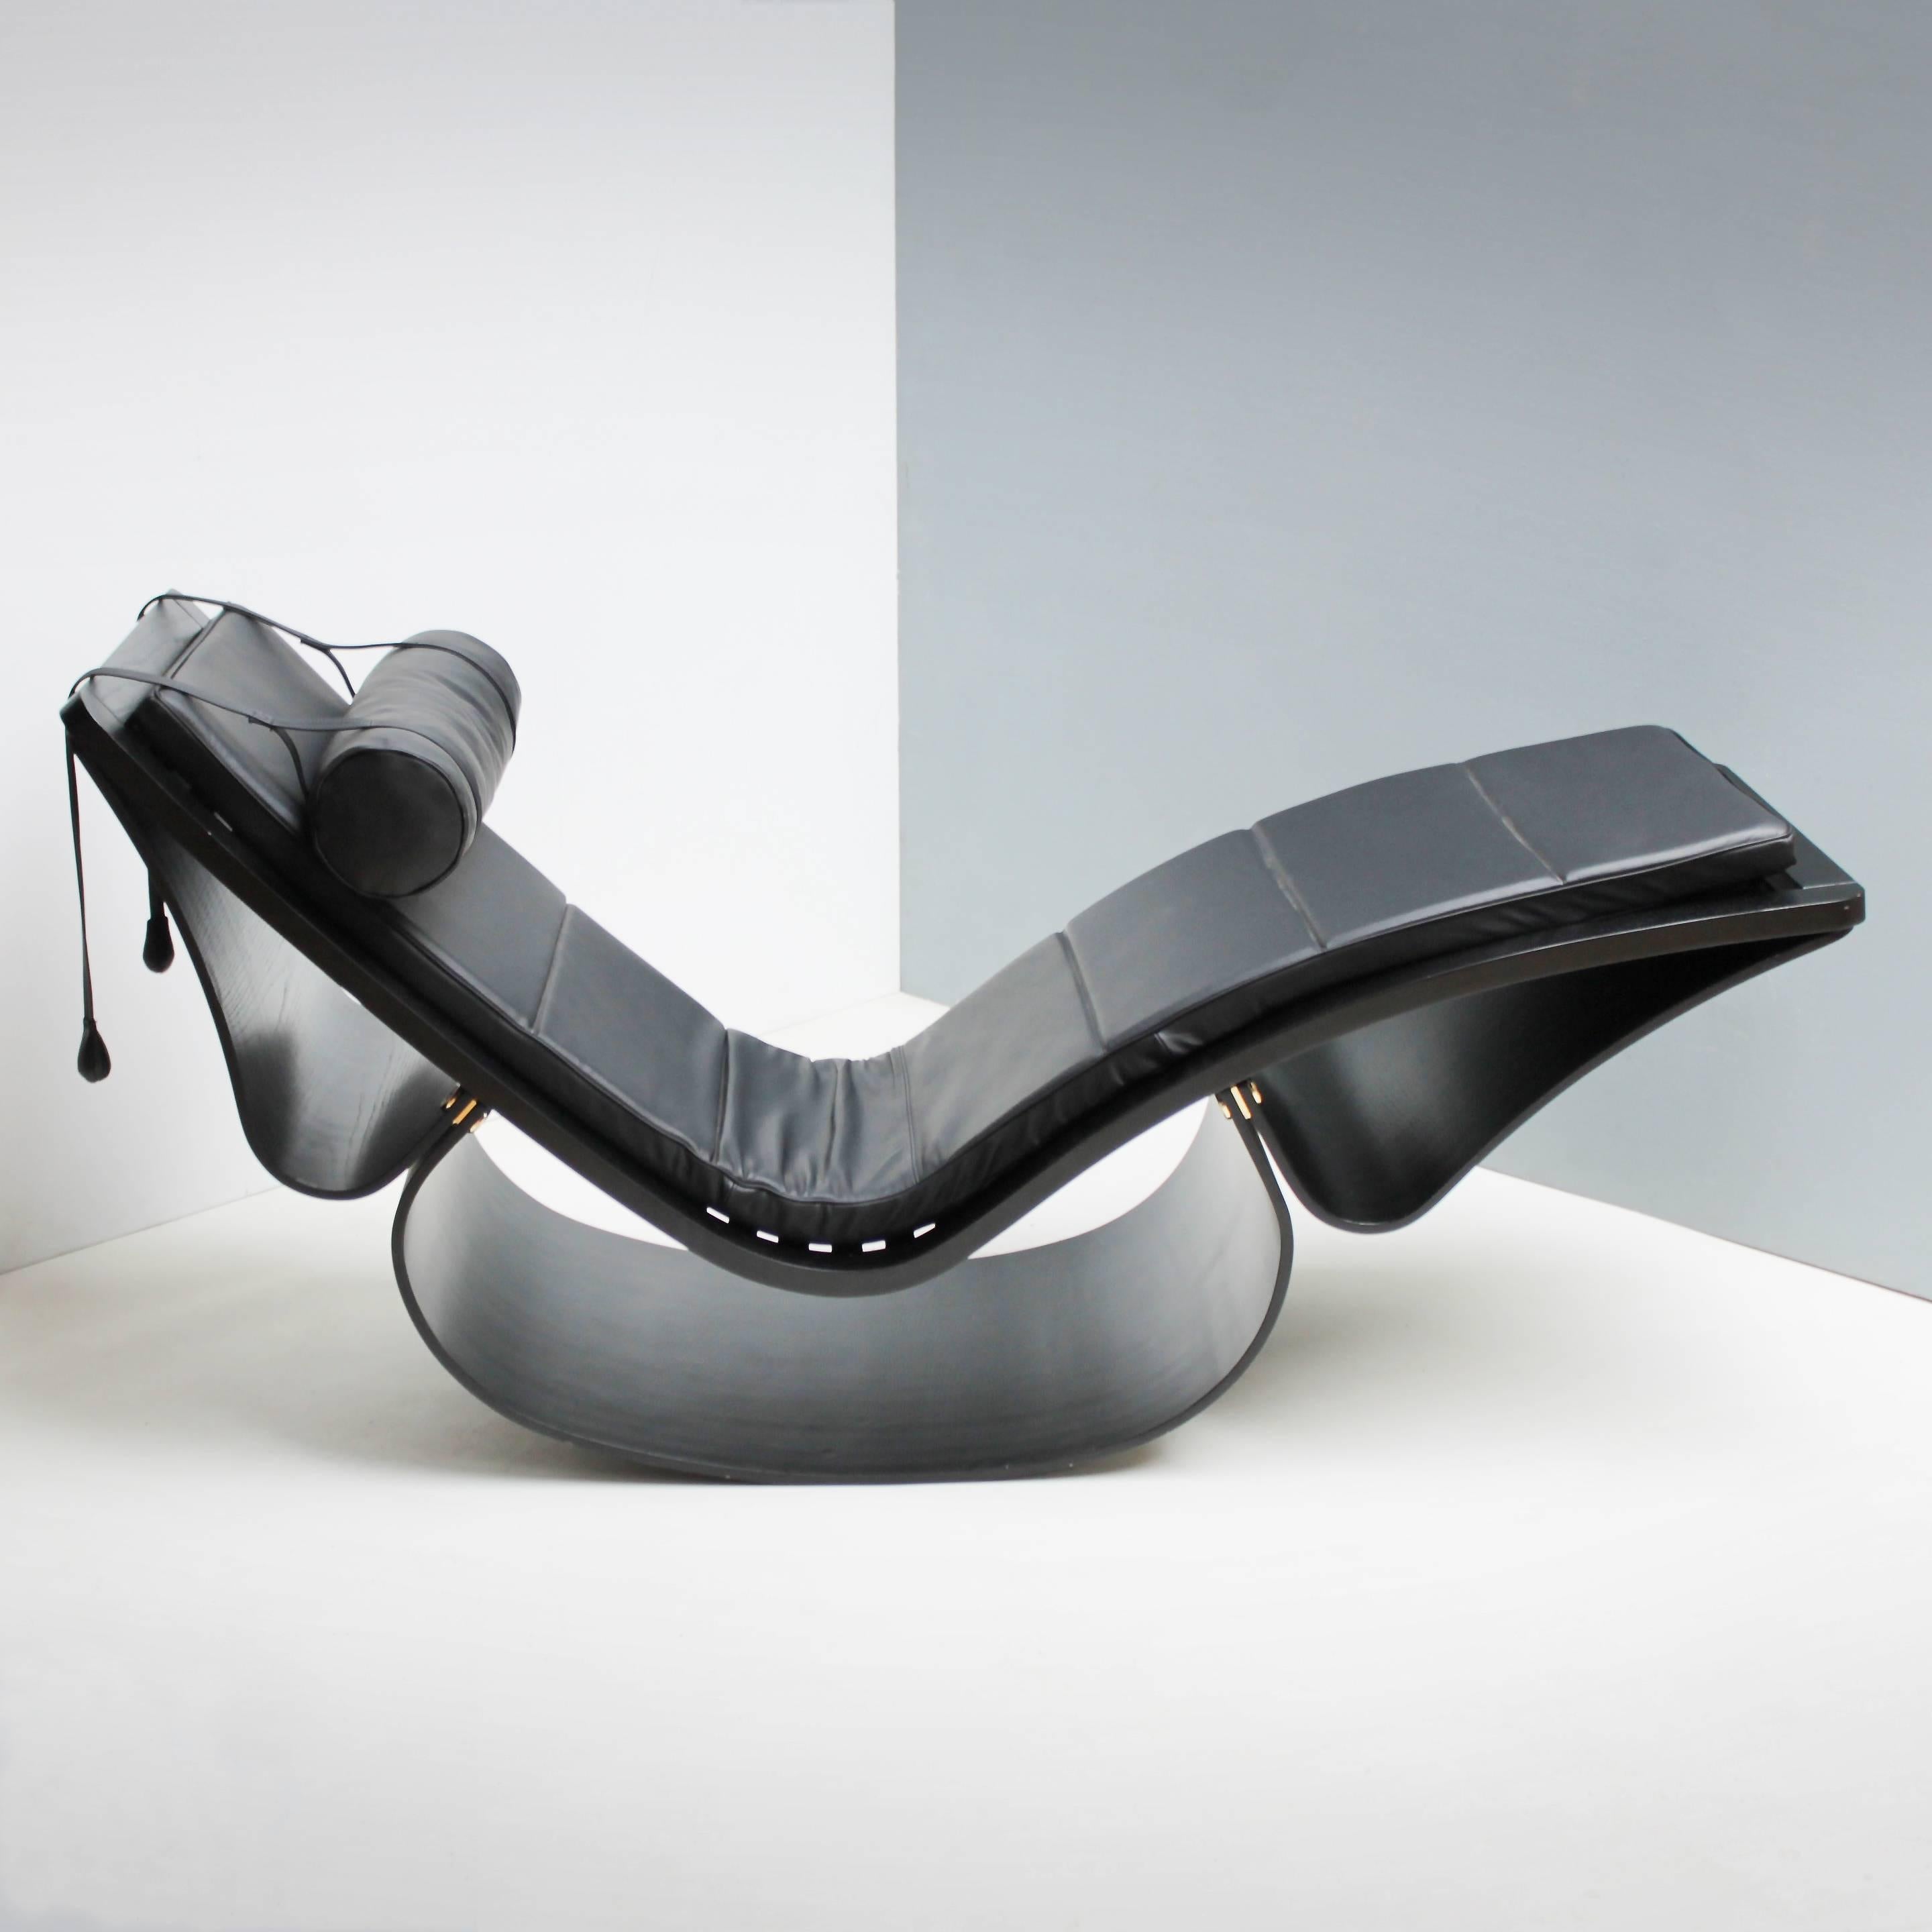 The rocking chaise or lounge chair 'Rio' by Oscar Niemeyer for Fasem International, Italy.
Upholstered in black leather, frame made of black stained ash. Adjustable headrest, with two small sack, filled with lead as contra weights.
This chair is